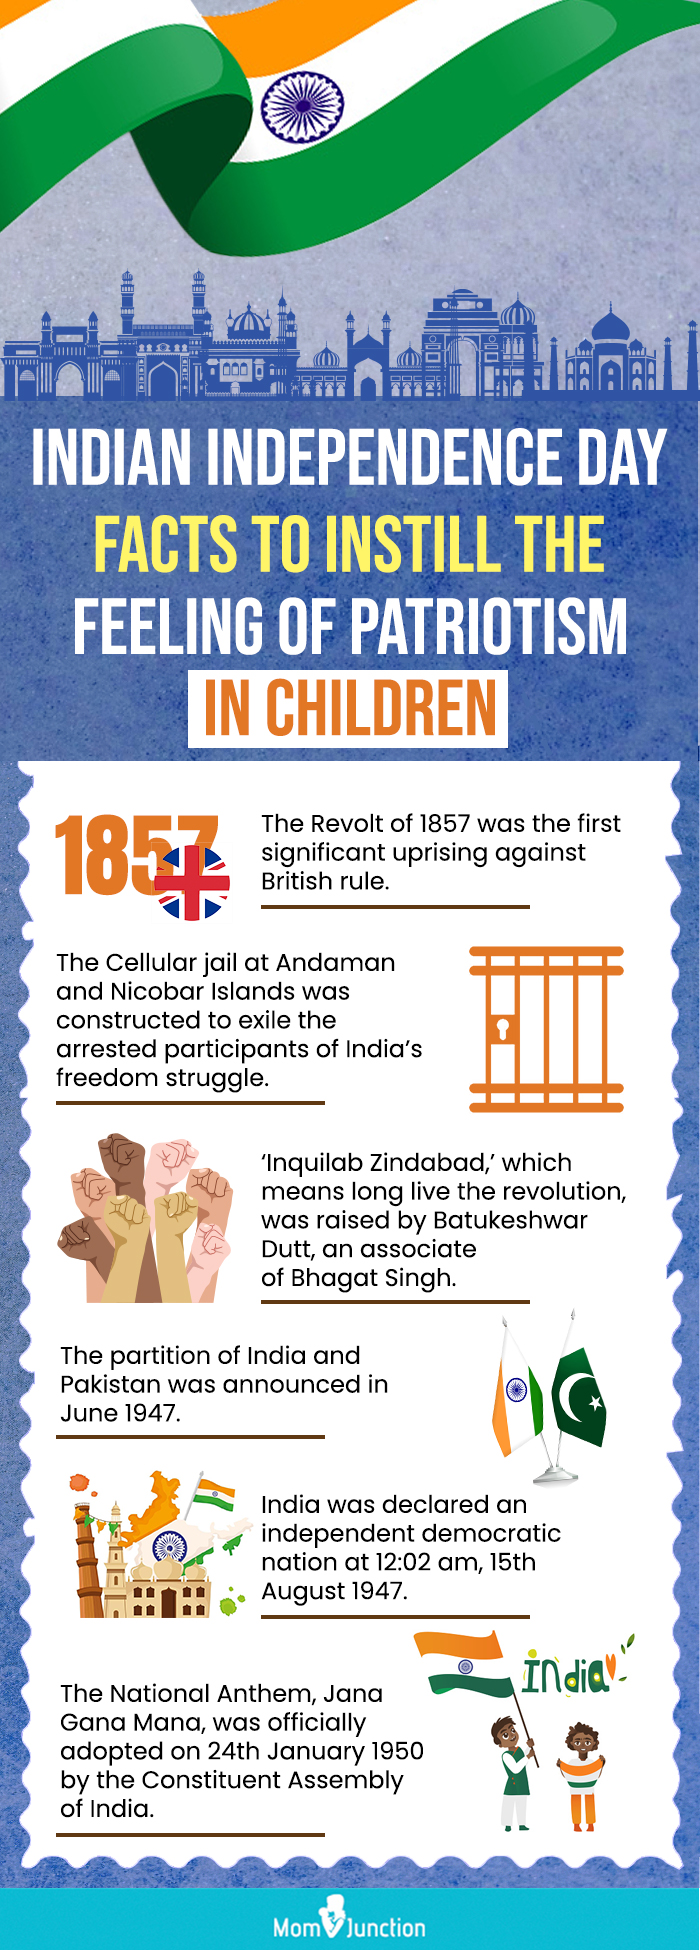 indian independence day facts to instill the feeling of patriotism in children (infographic)